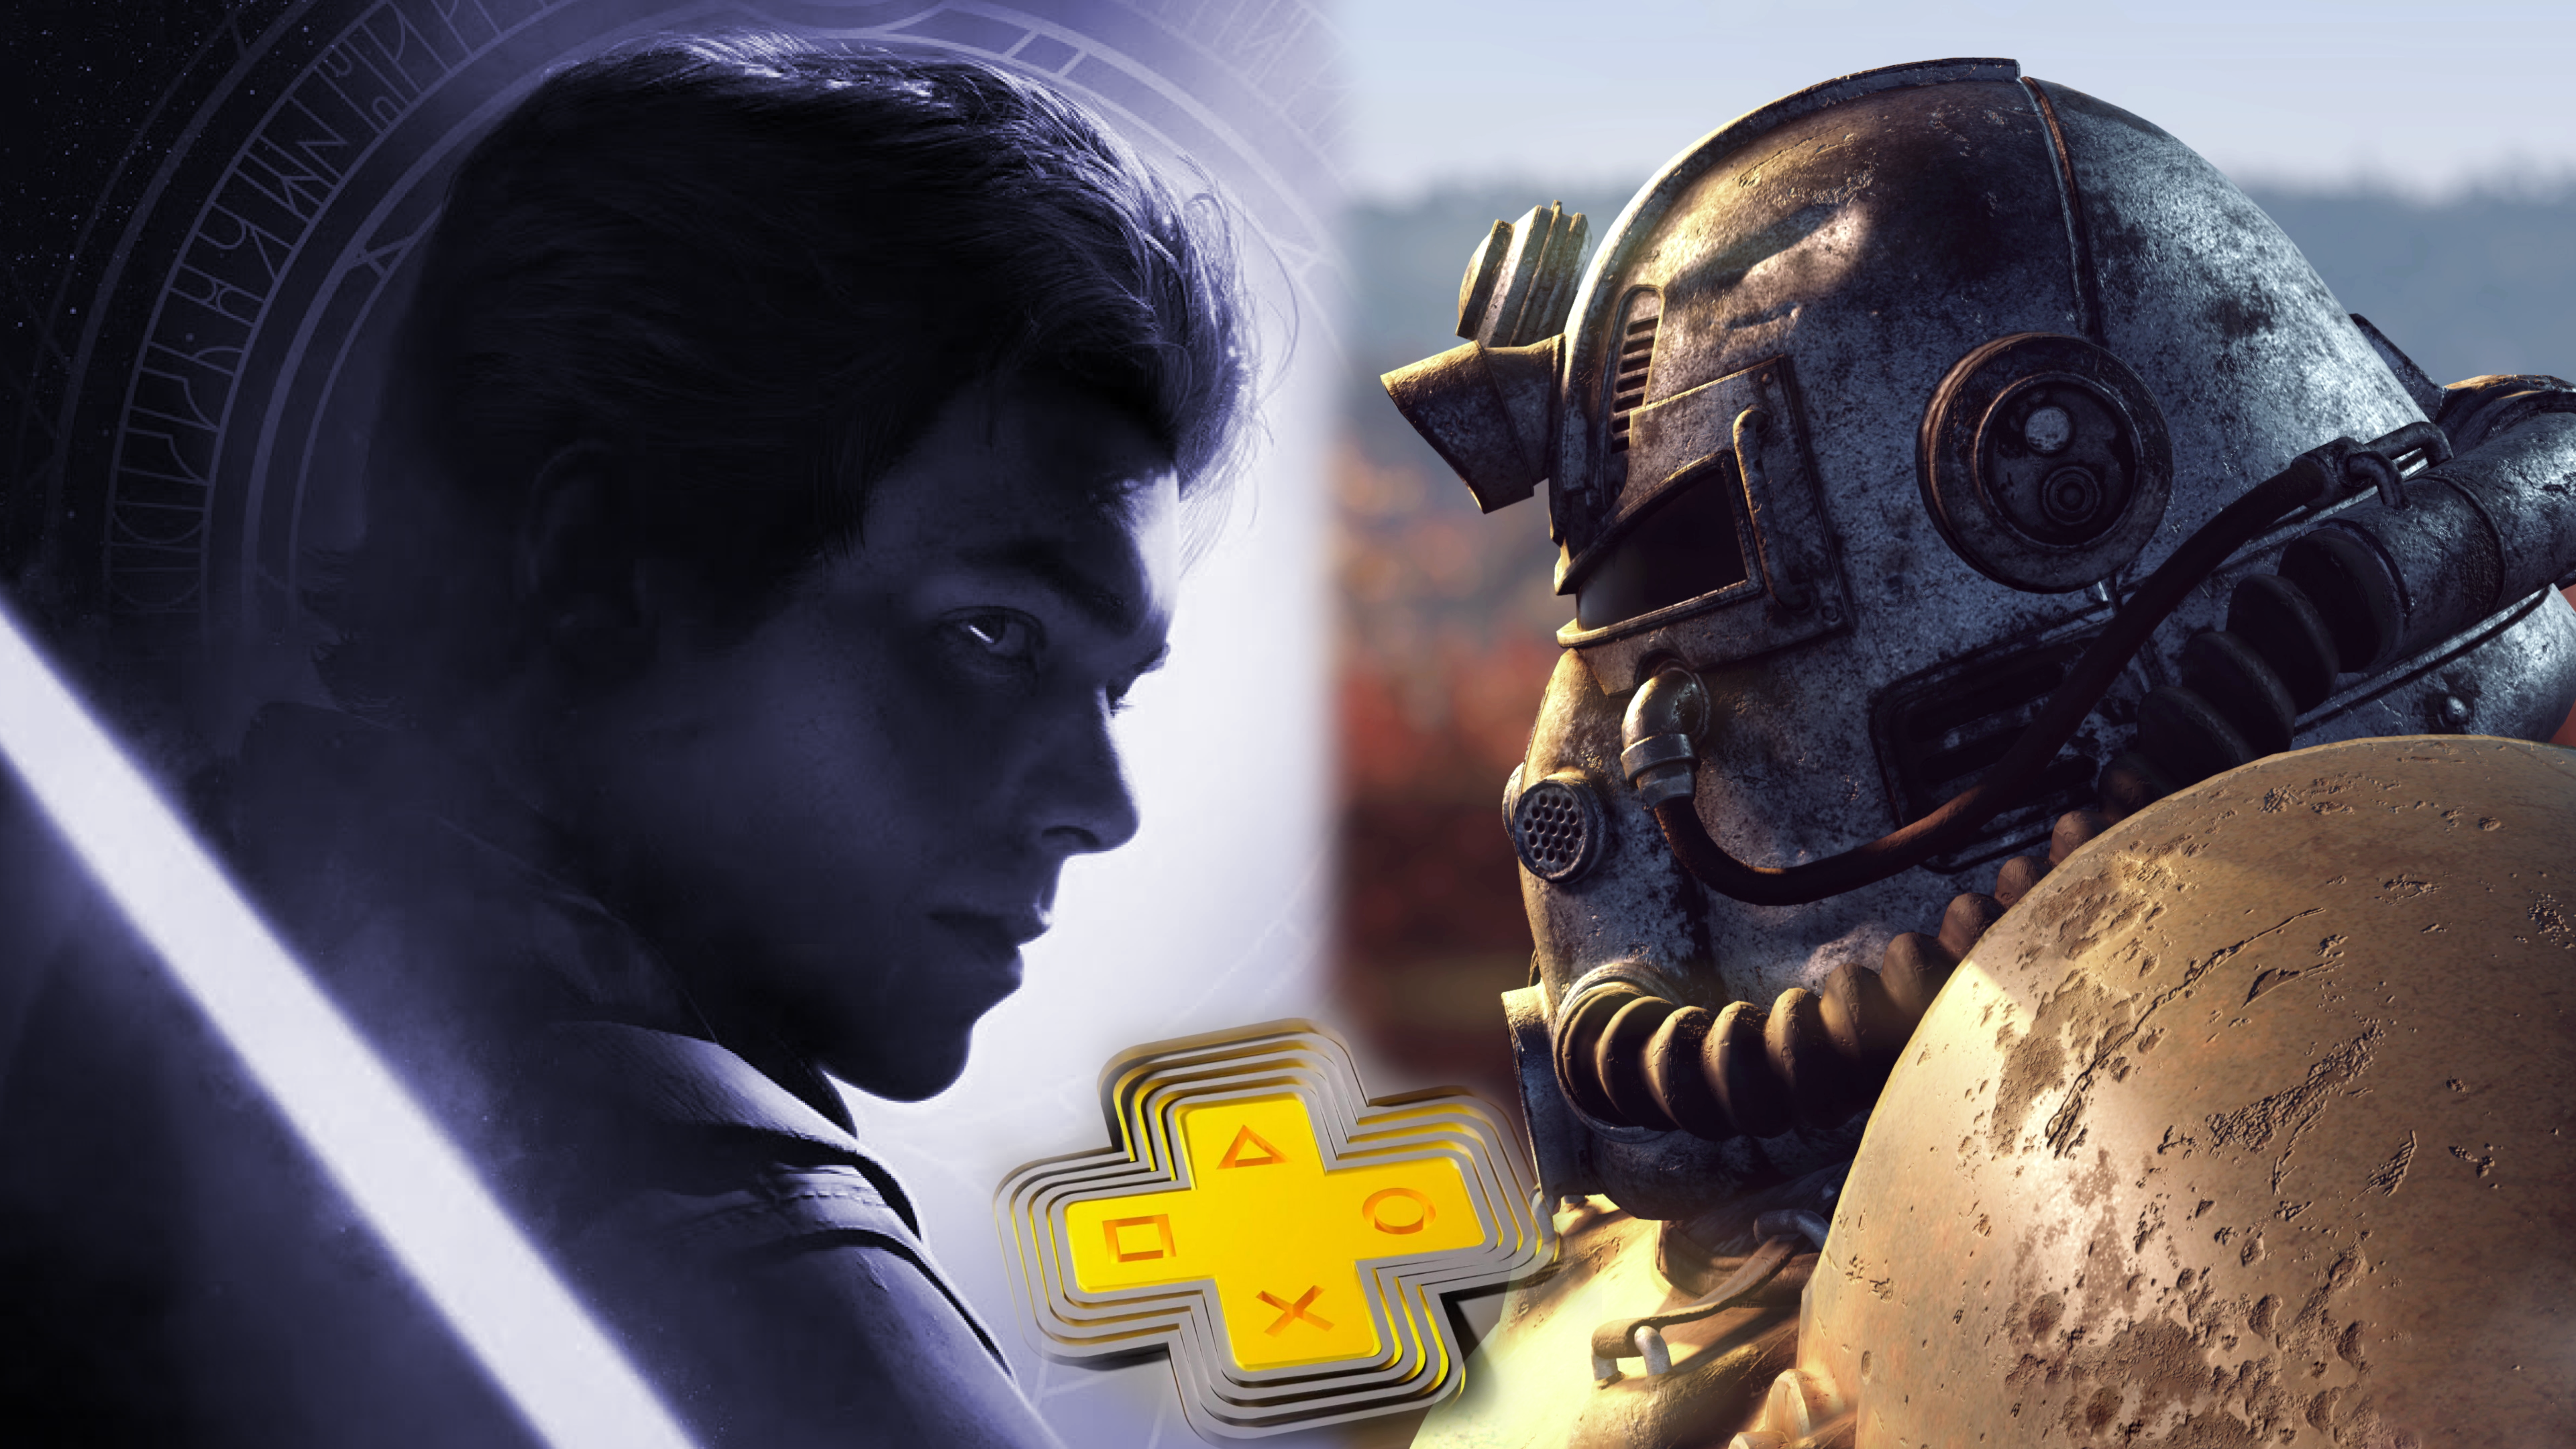 PlayStation Plus Monthly Games for January: Star Wars Jedi: Fallen Order,  Fallout 76, Axiom Verge 2 – PlayStation.Blog